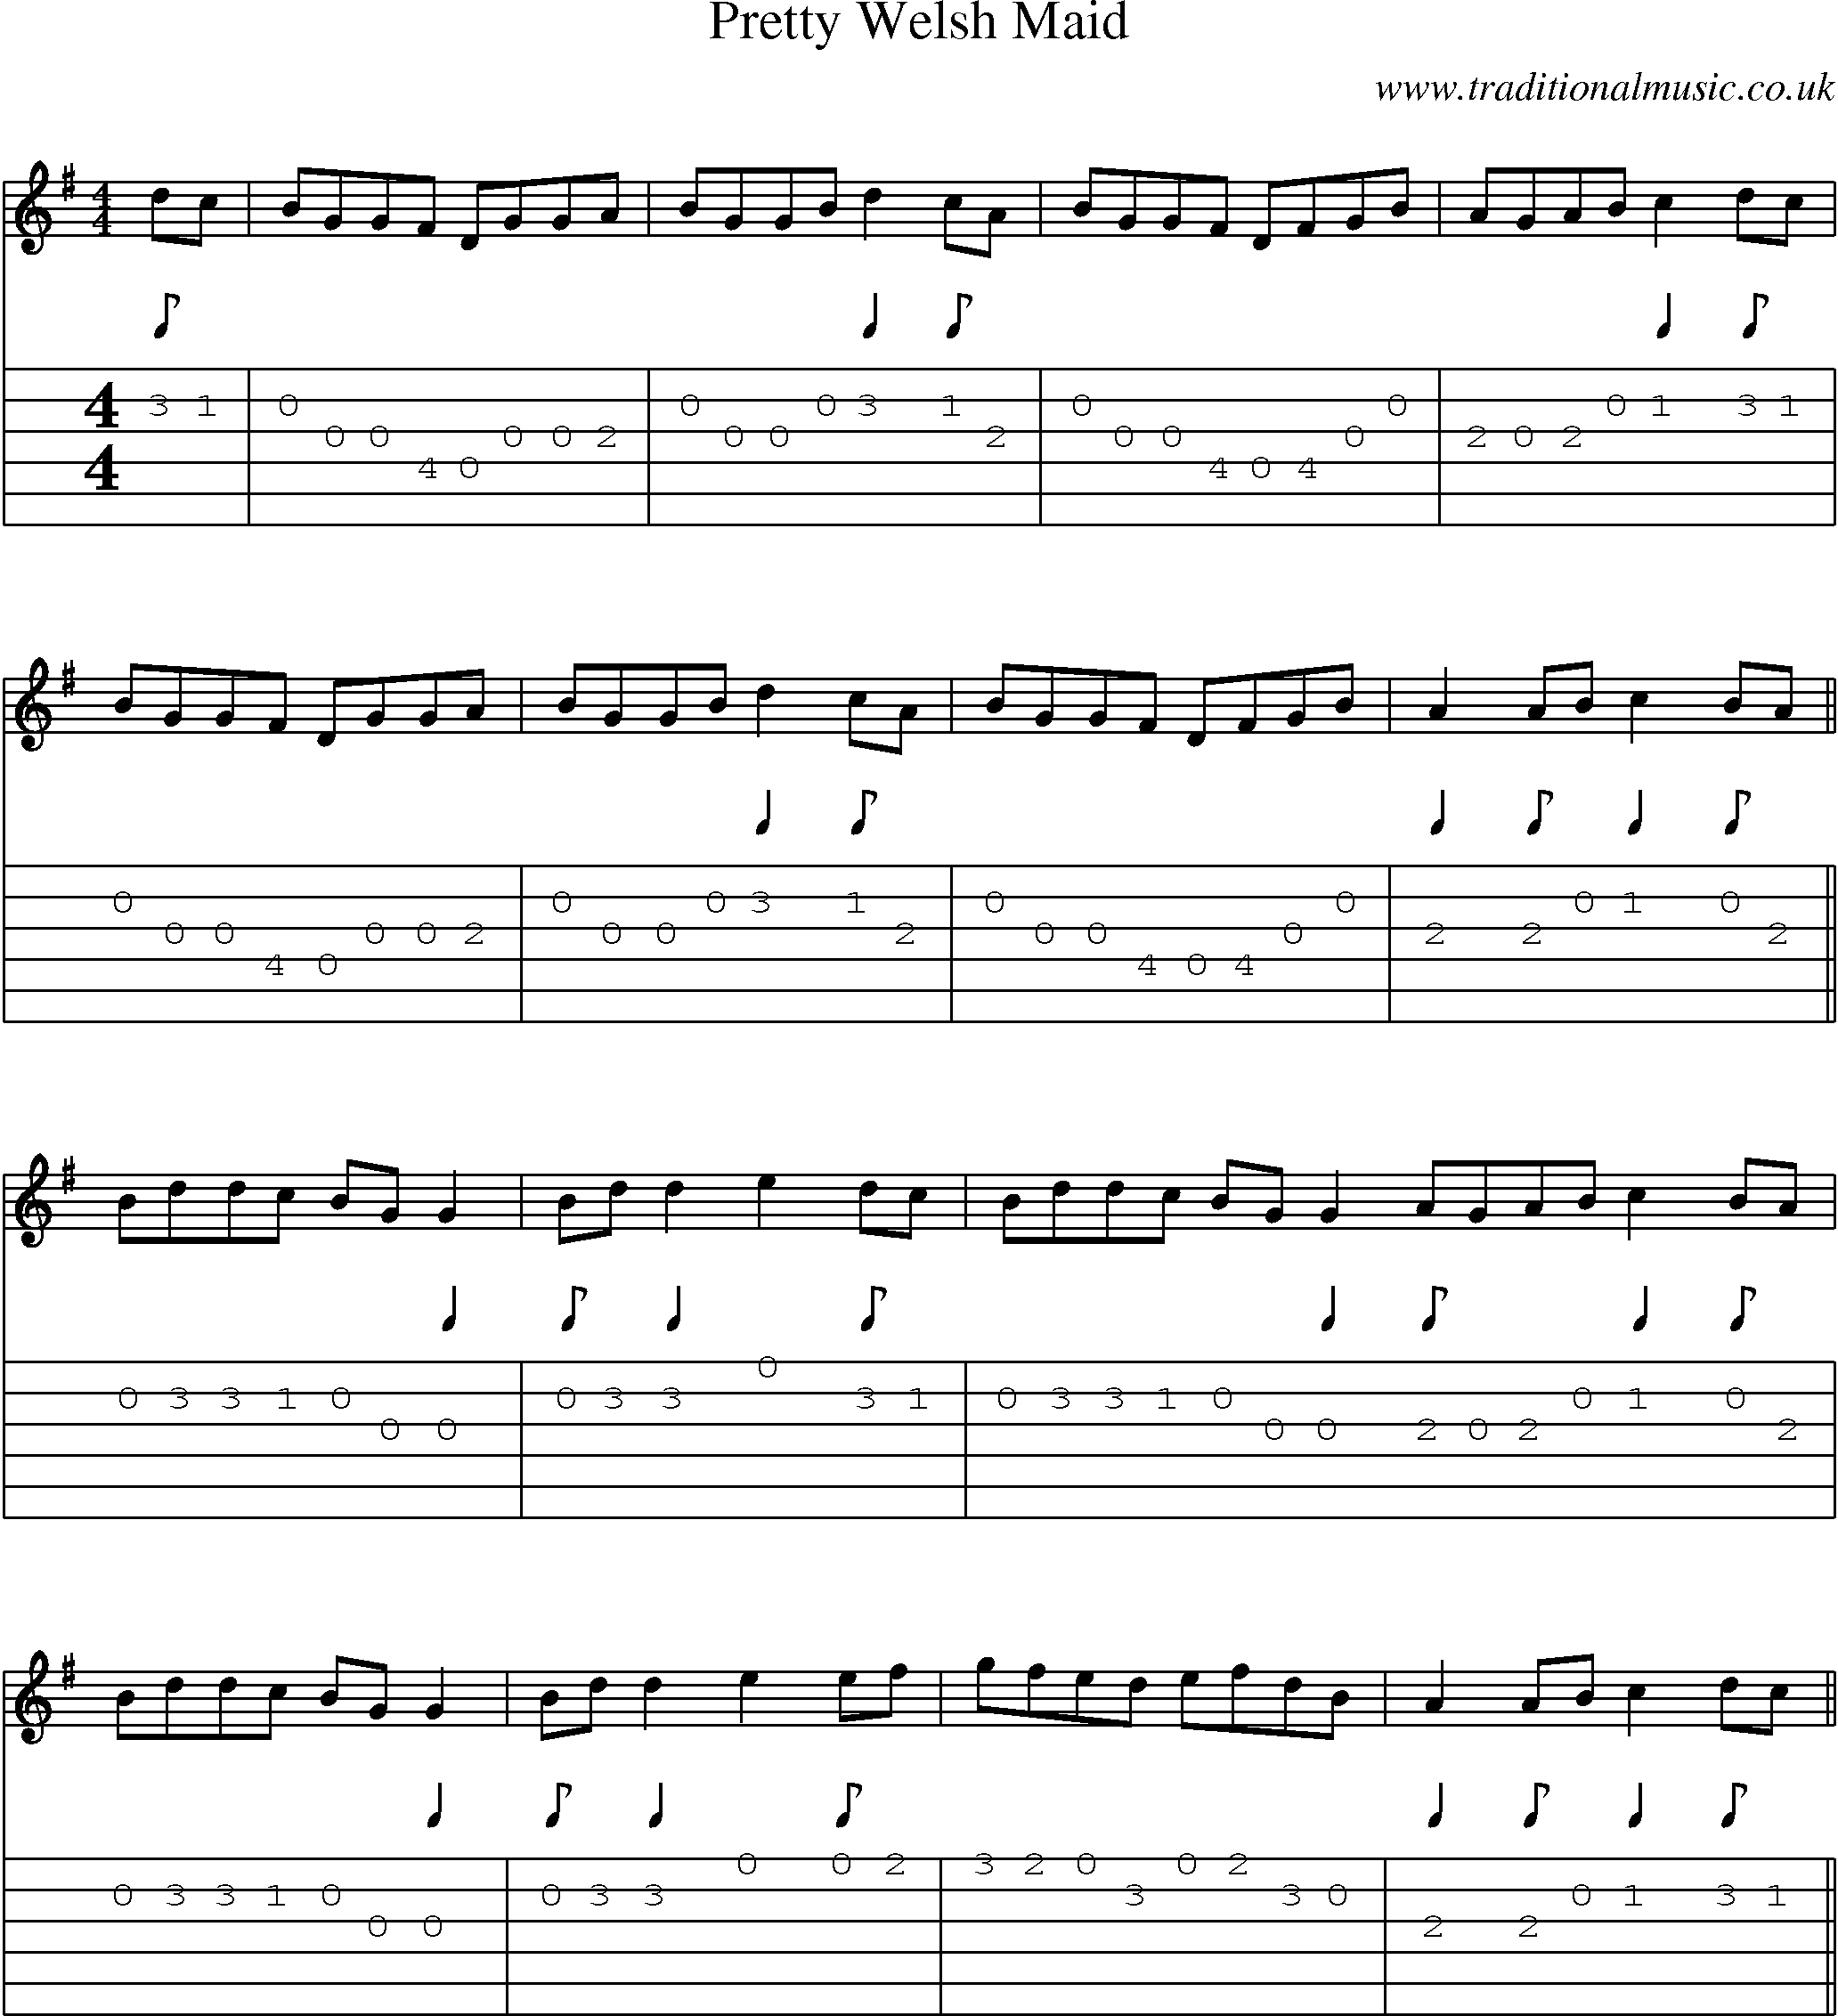 Music Score and Guitar Tabs for Pretty Welsh Maid